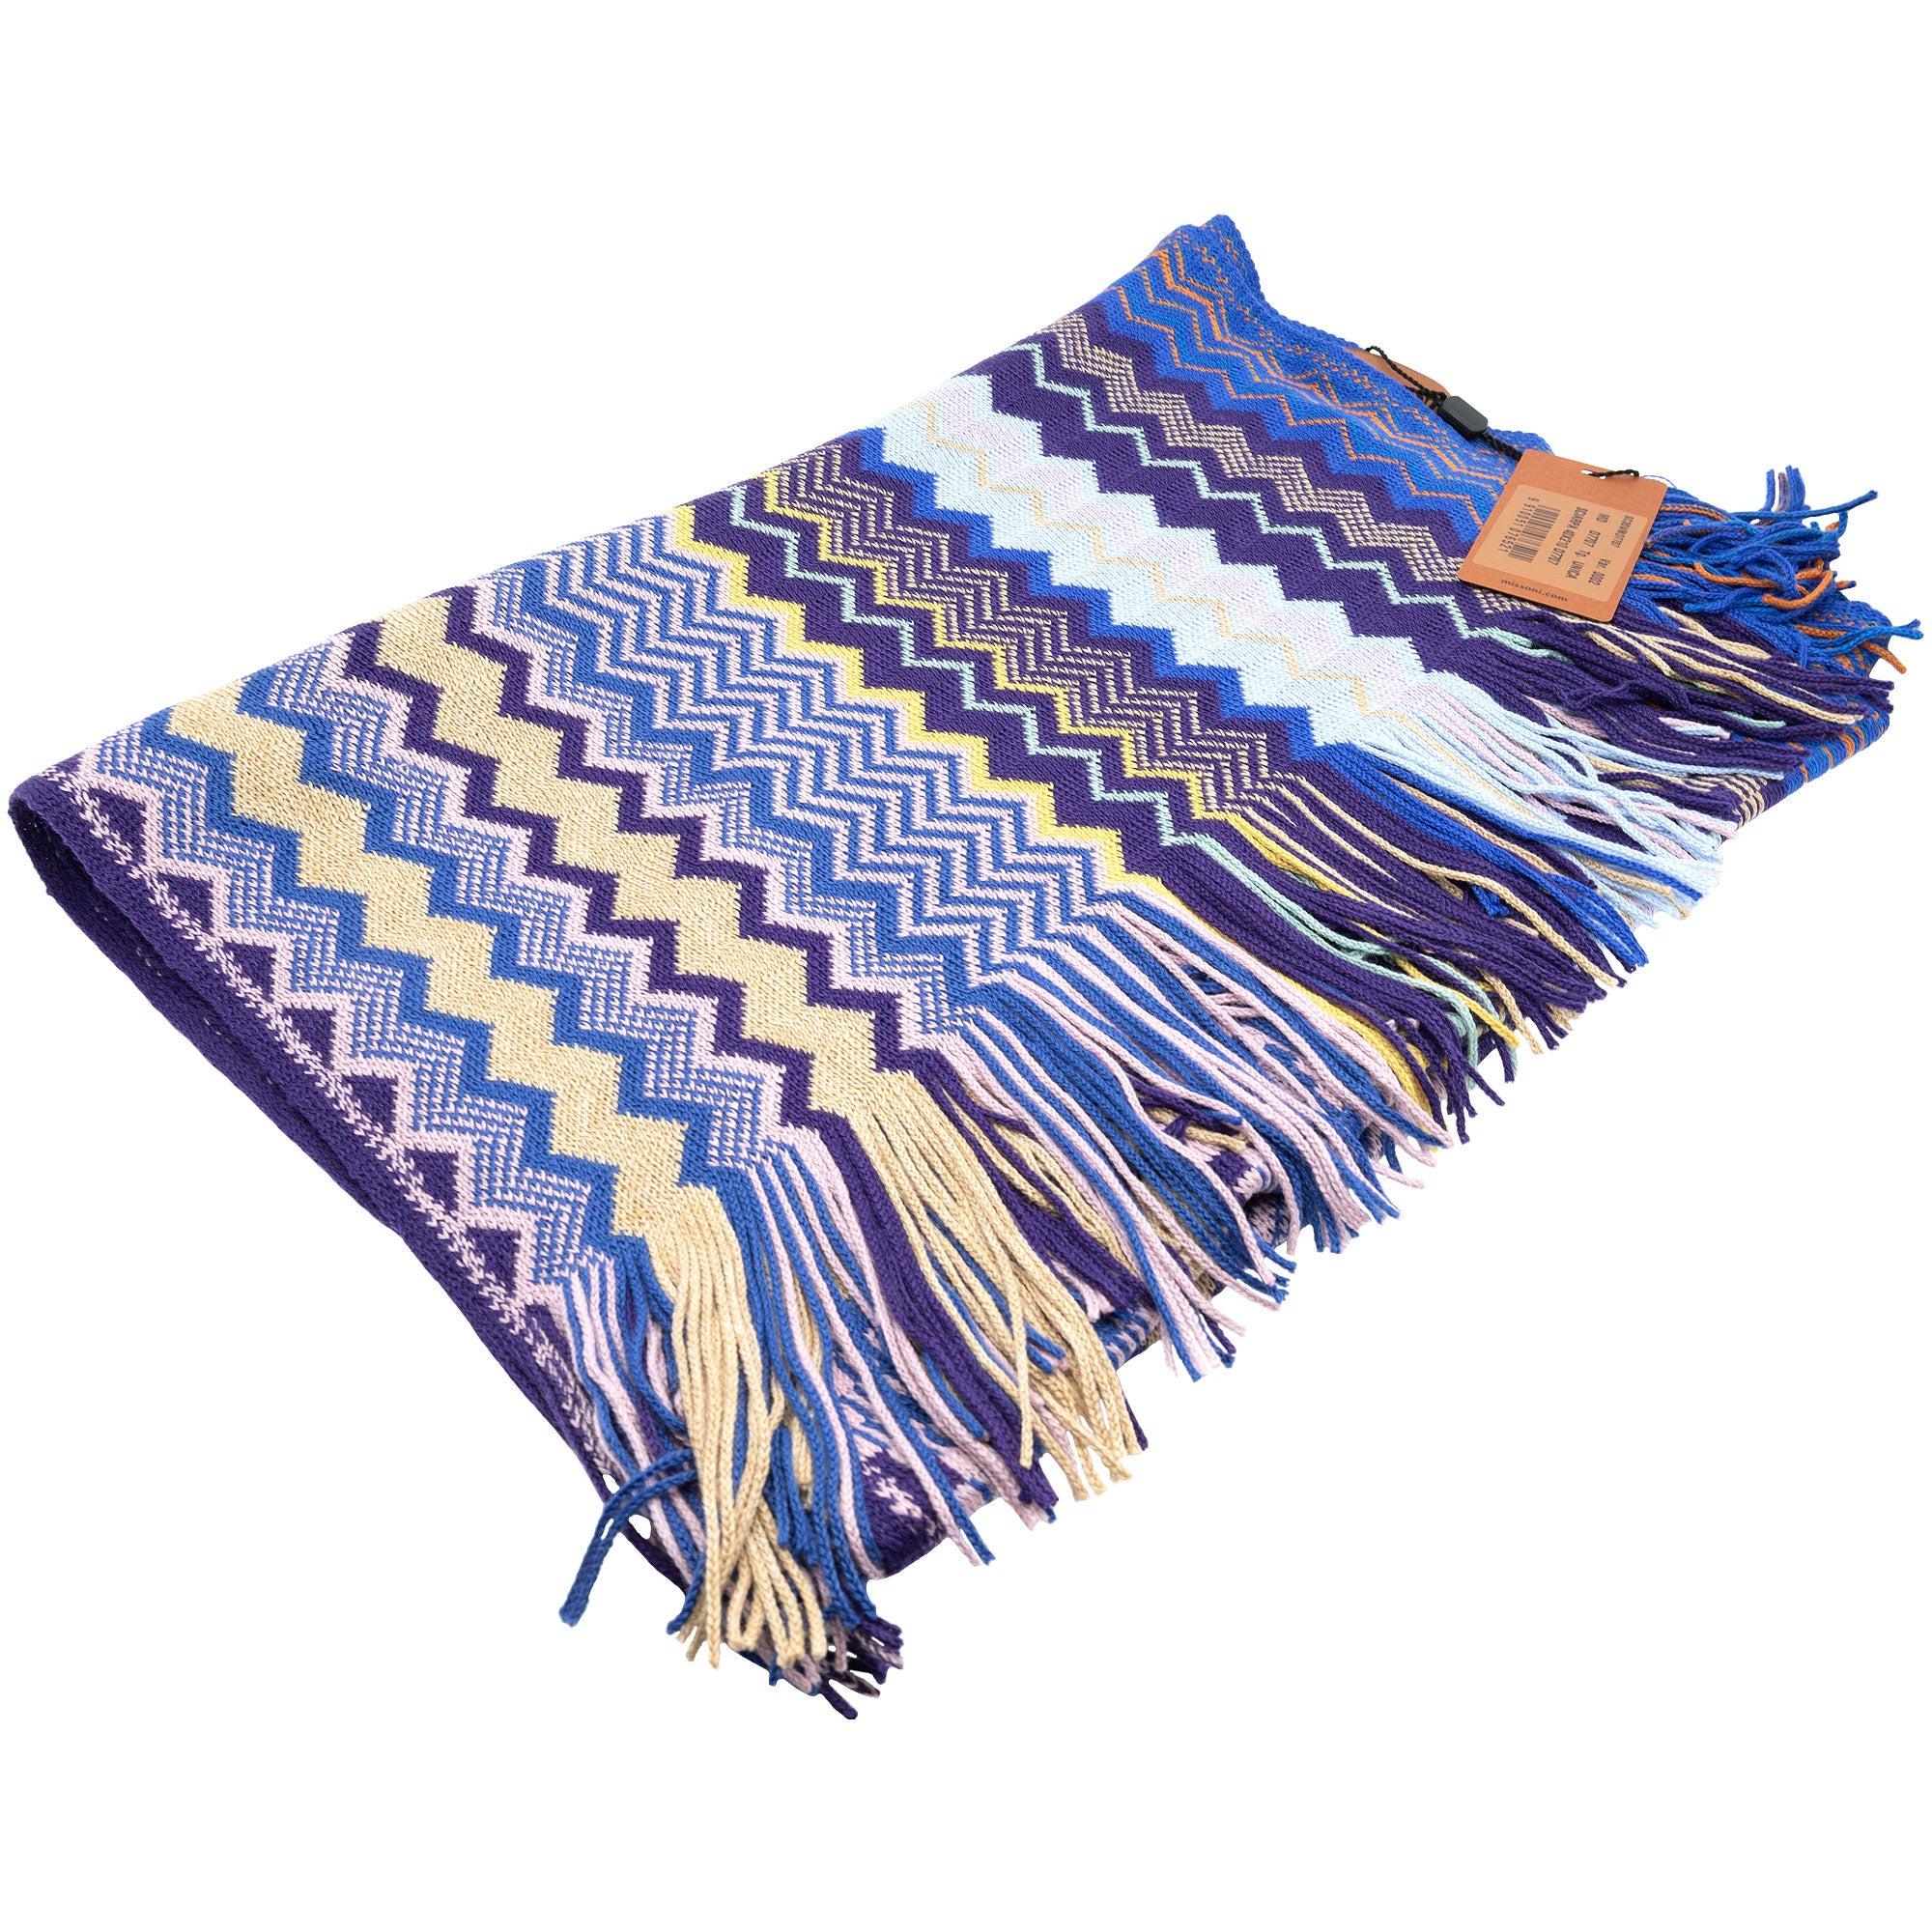 Missoni Cool Toned Multicolor Scarf With a Geometric Zig-Zag Pattern & Fringes